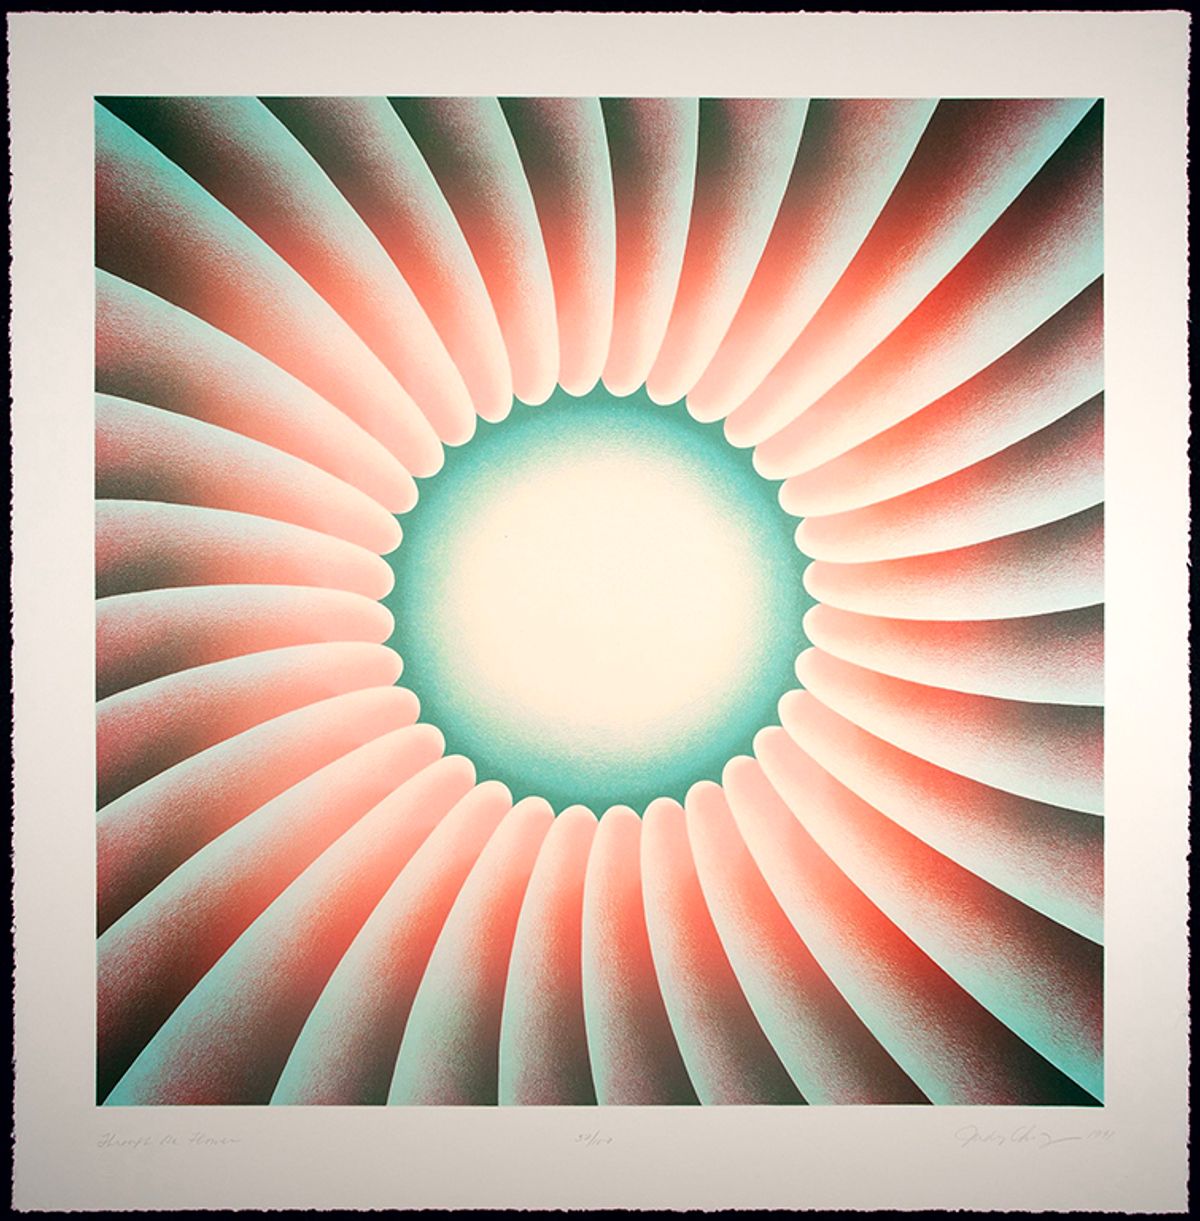 Judy Chicago, Through the Flower, serigraph on paper, 1991 Judy Chicago/Artists Rights Society (ARS), New York; Photo: ©Donald Woodman/ARS,  New York